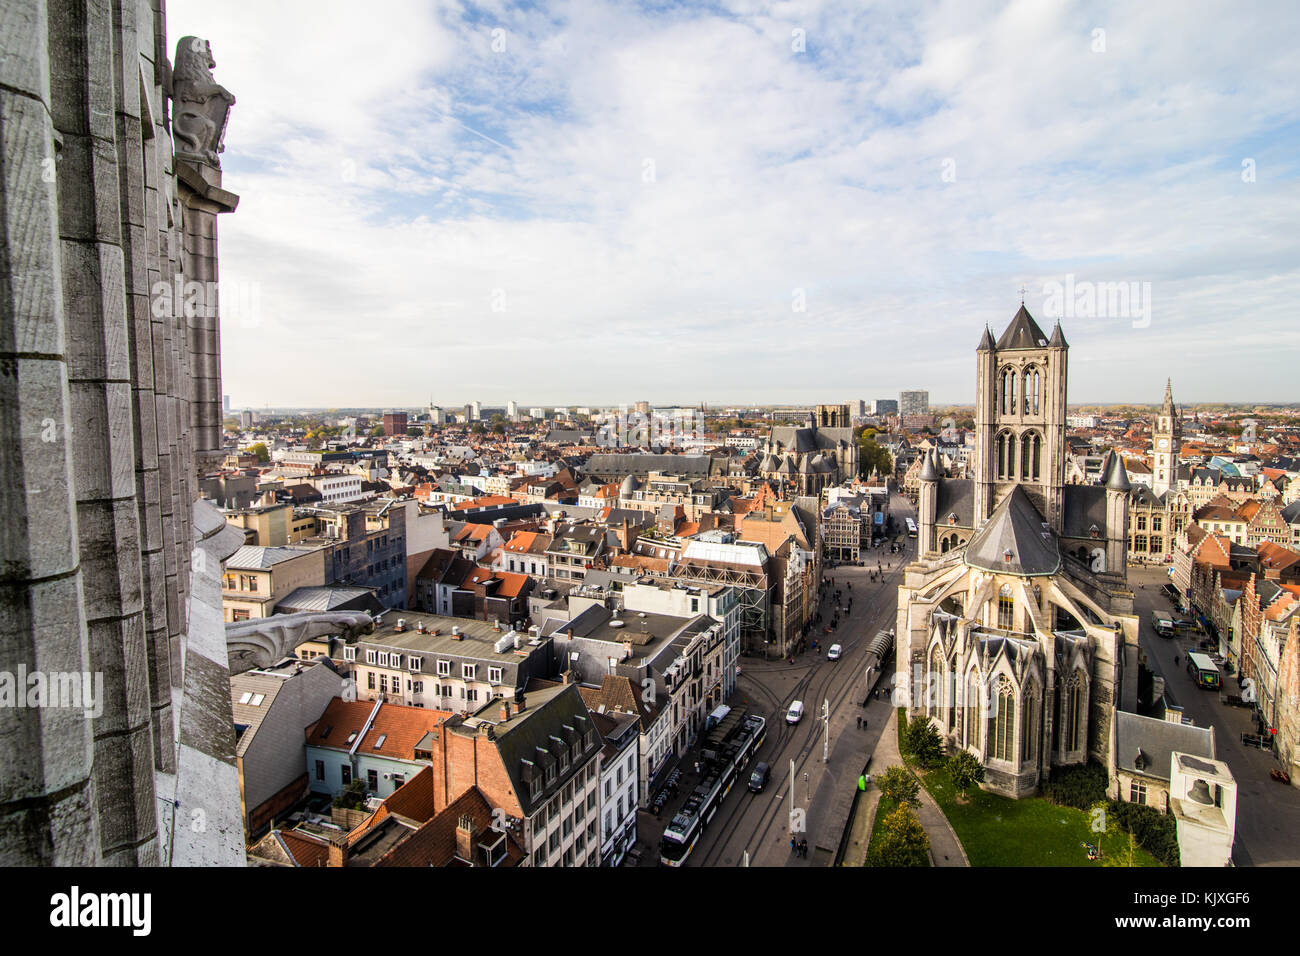 GHENT, BELGIUM - November, 2017: Aerial view of Architecture of Ghent city center. Ghent is medieval city and point of tourist destination in Belgium. Stock Photo